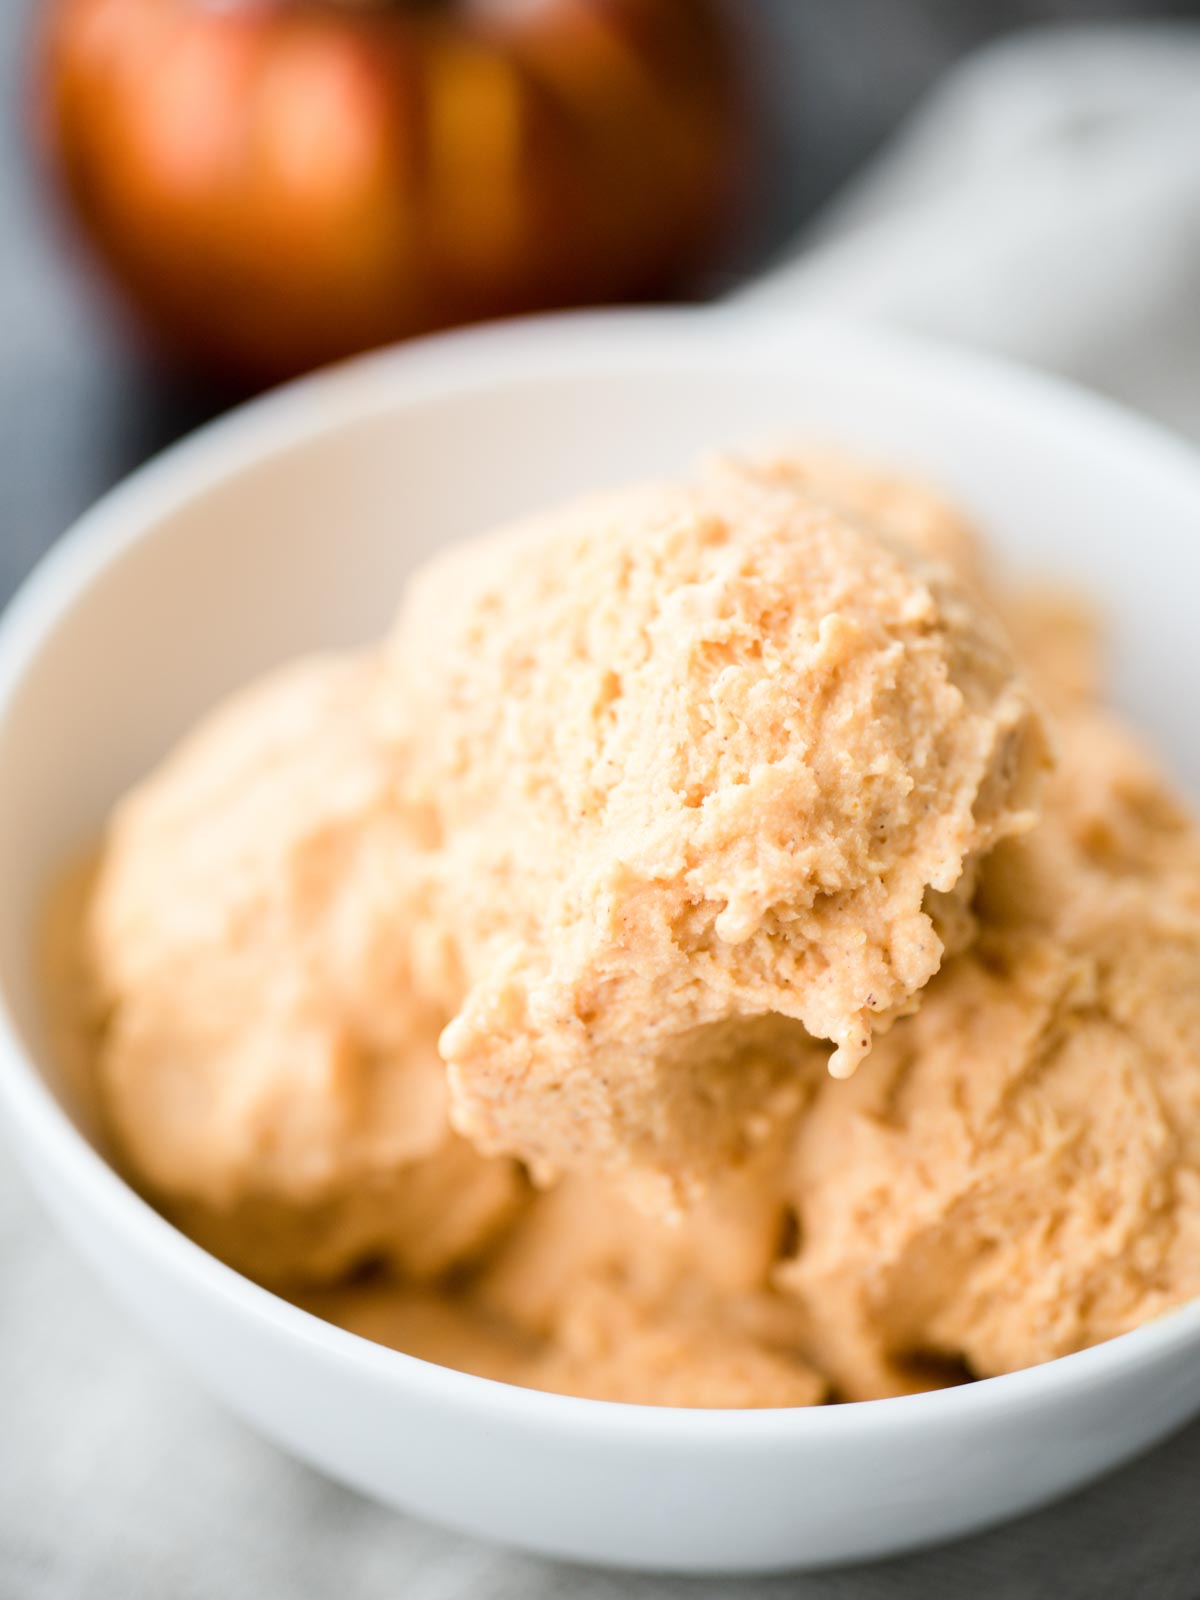 Pumpkin scoops of ice cream in a bowl.